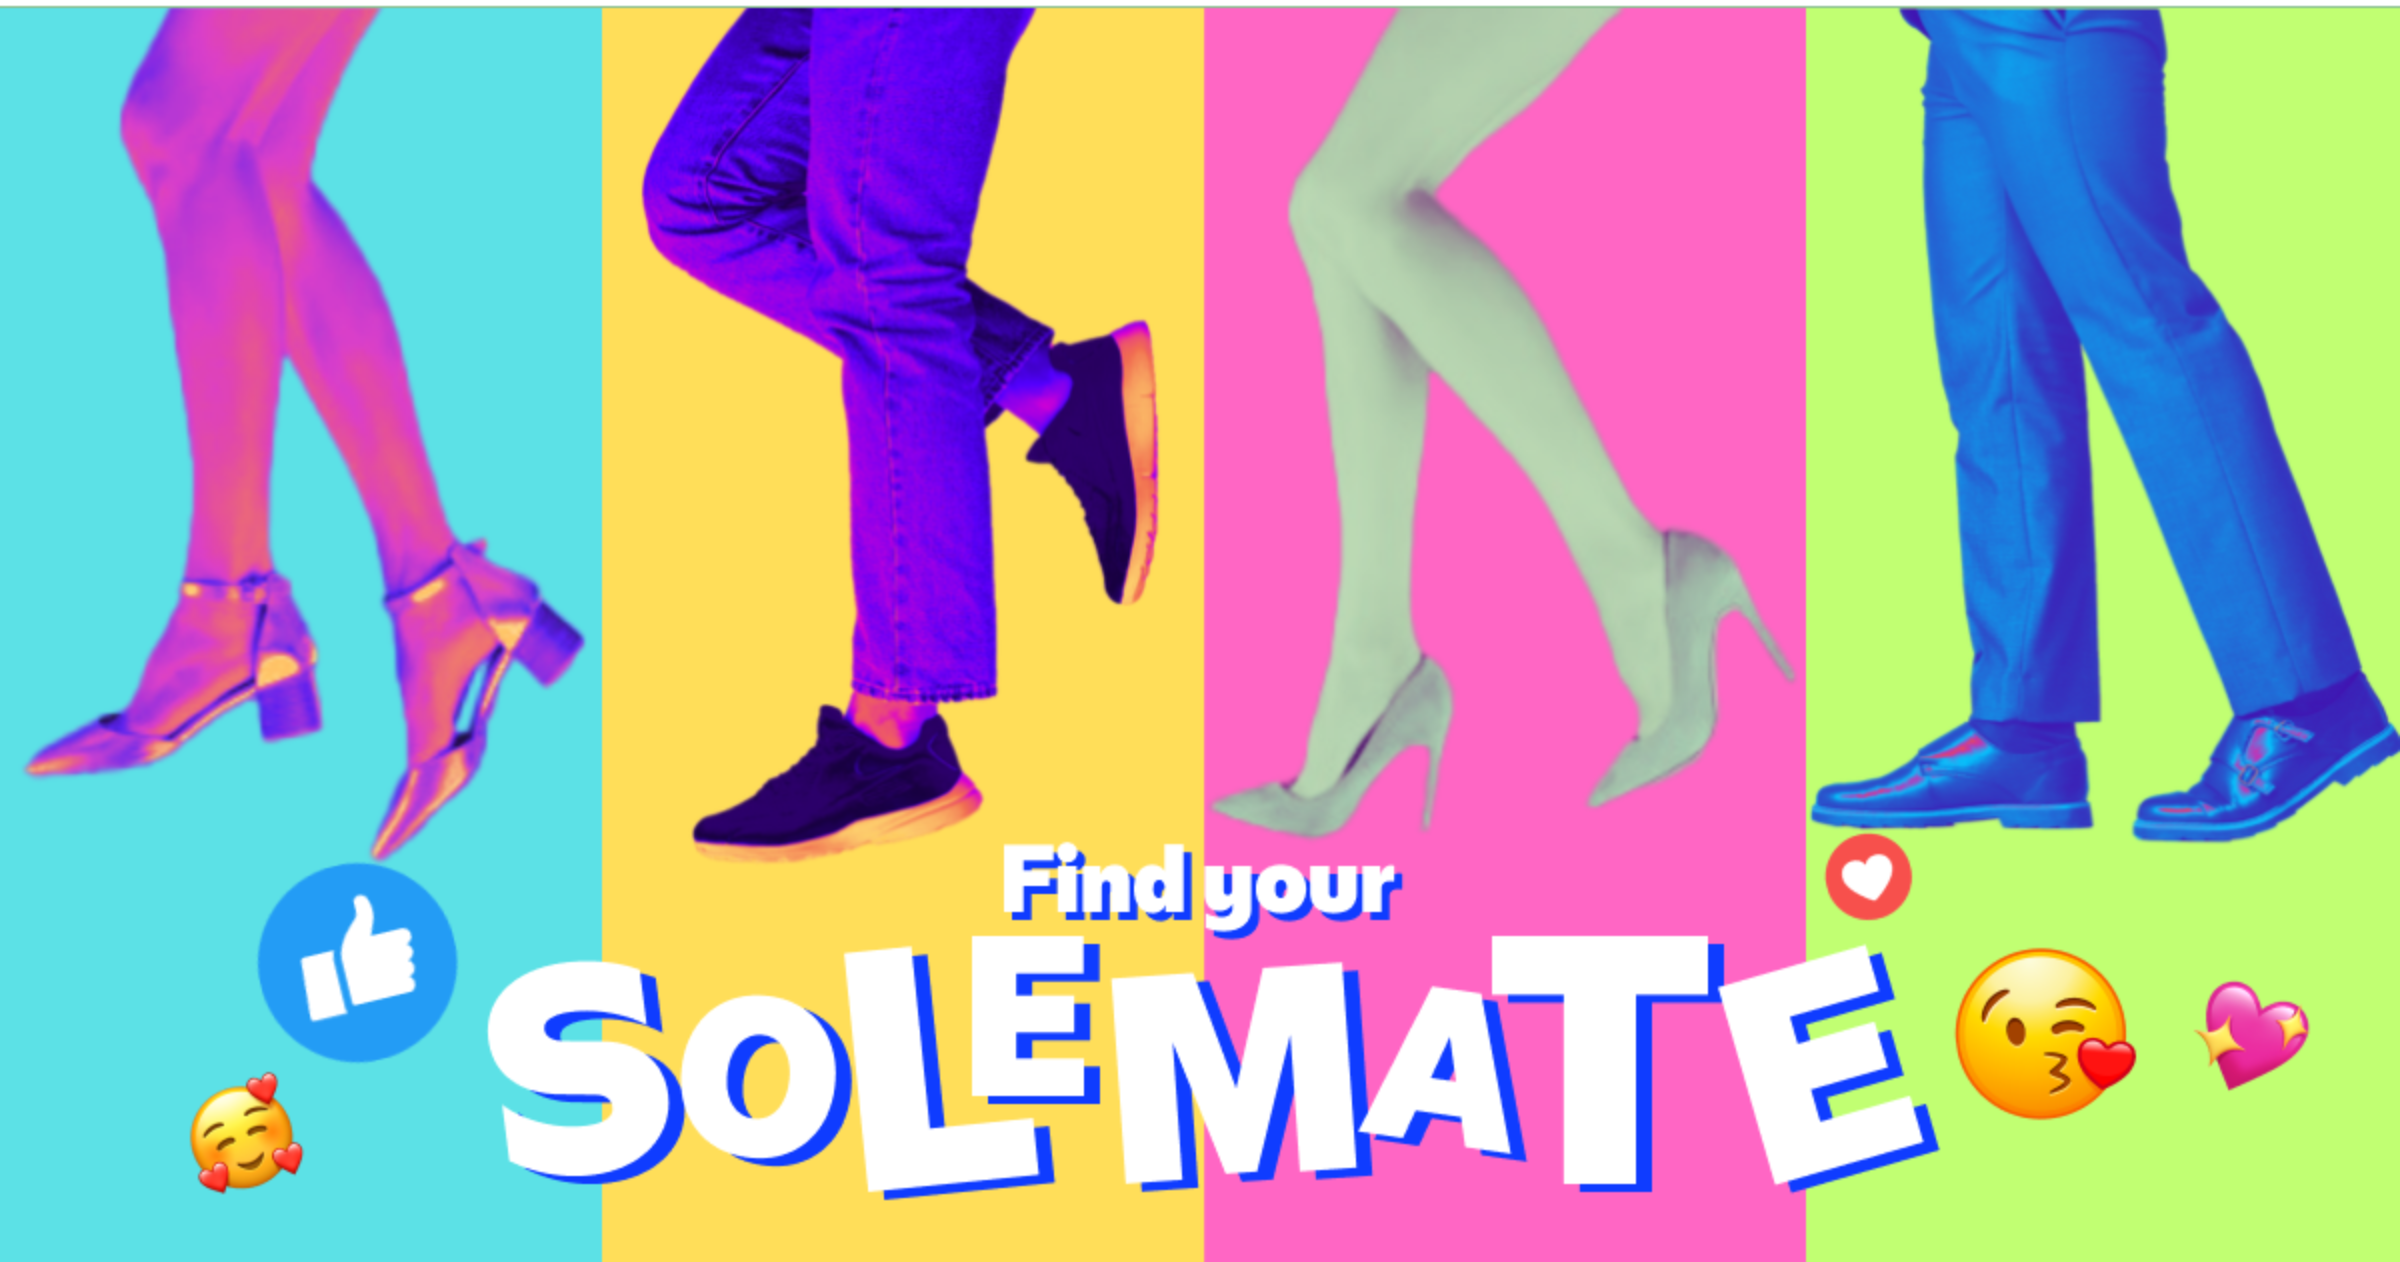 Are You Currently Sole Searching? Here’s a Helpful Guide so You Can Step Up your Shoe Game.